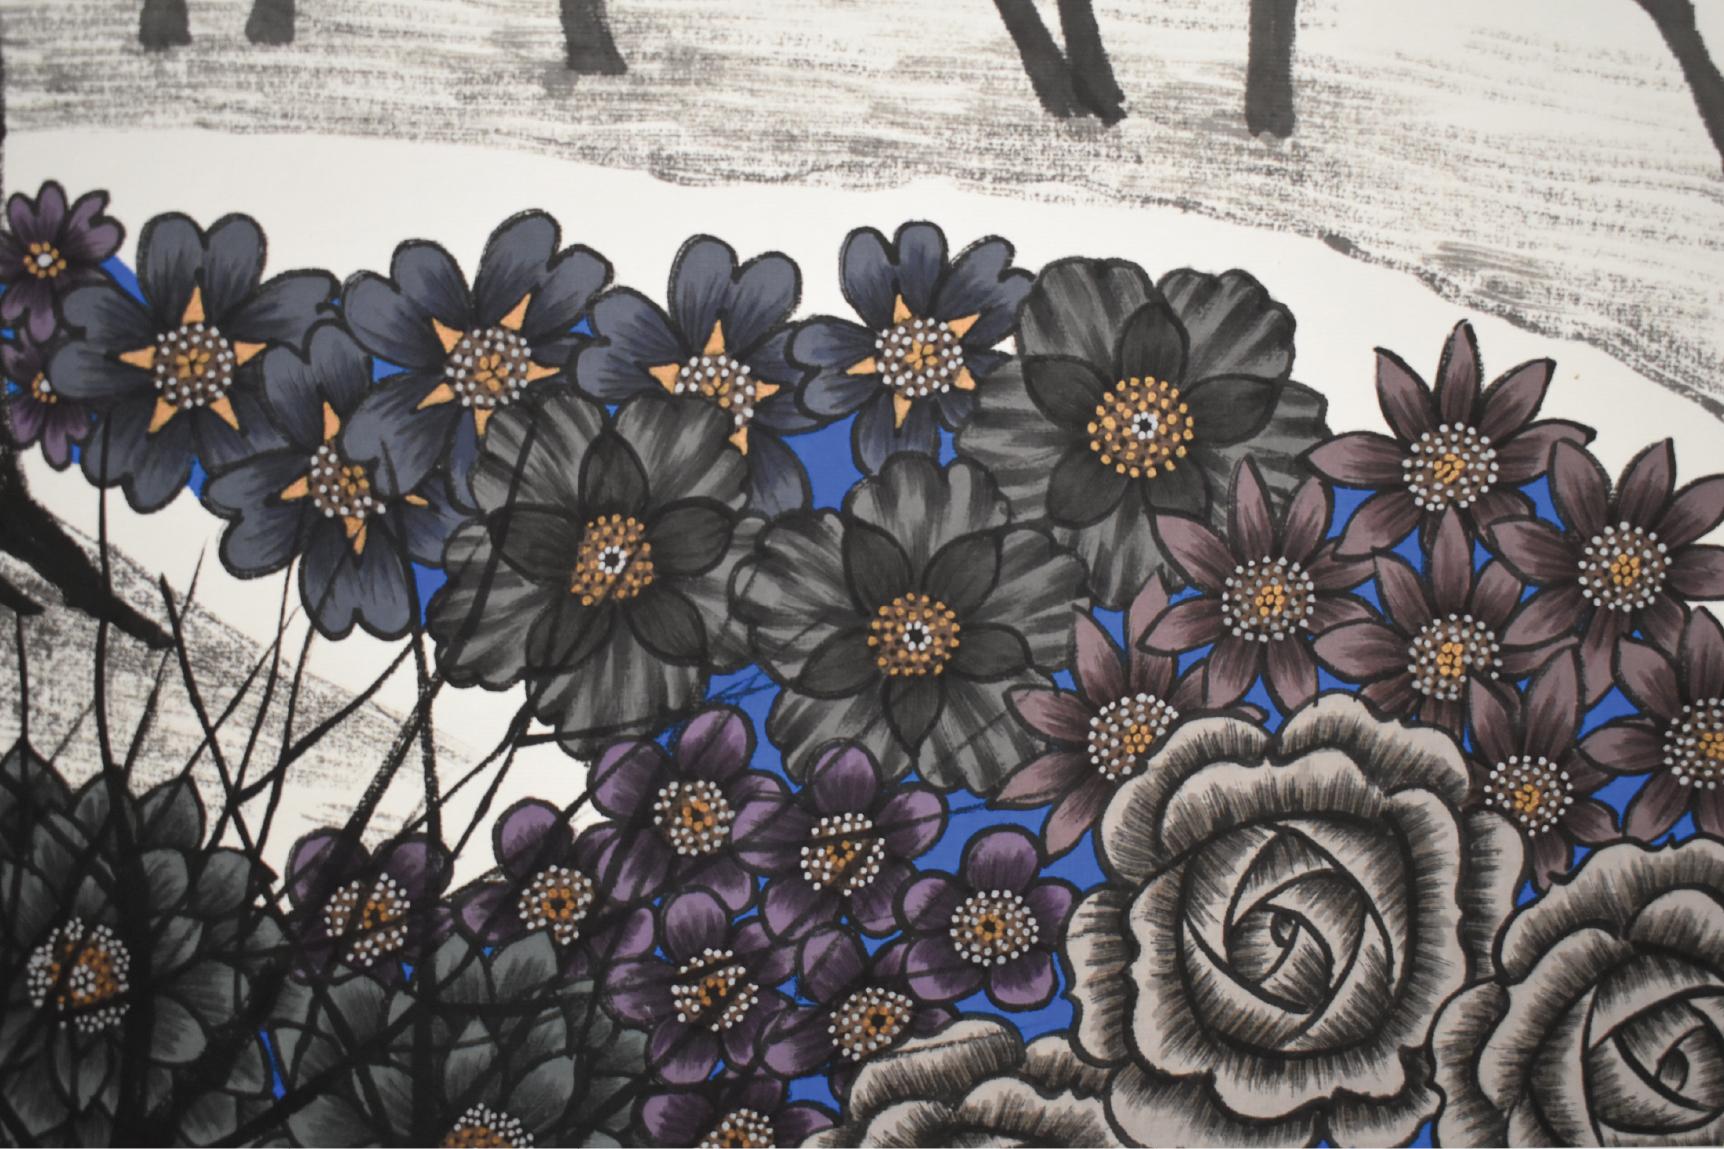 Dark Blue Flowers Blossom In Surrealistic Landscape. Chinese Ink In Modern Era. - Painting by Kium